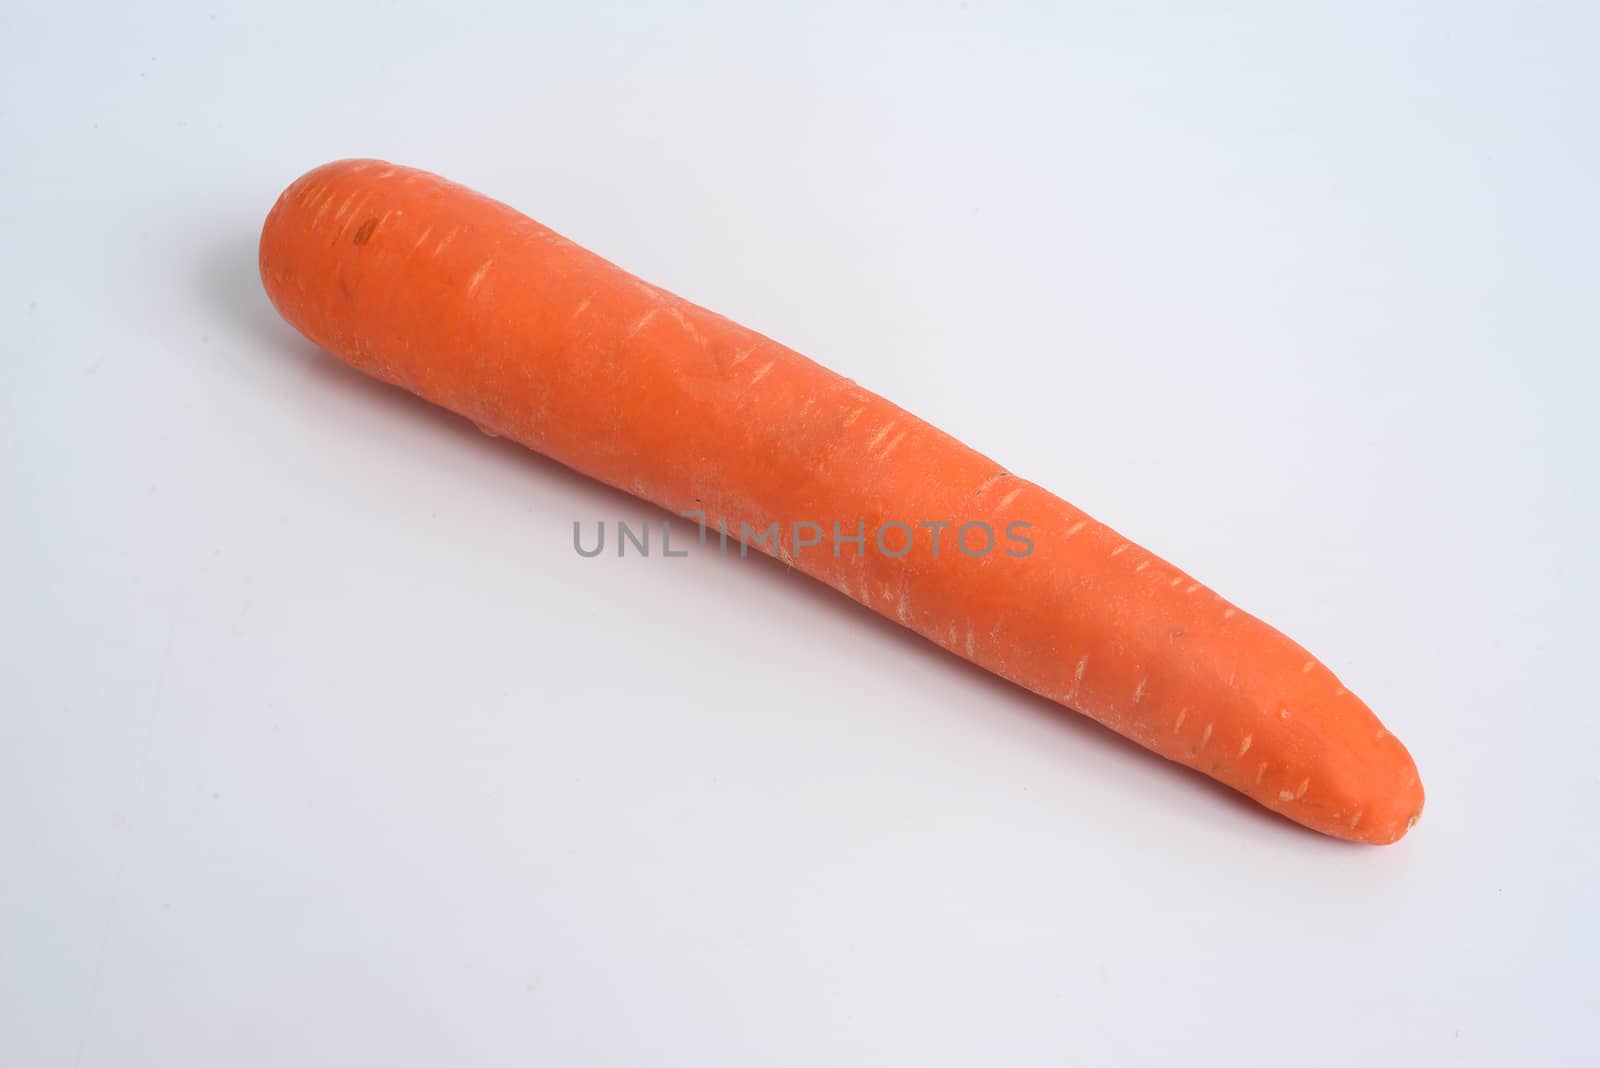 The carrot (Daucus carota subsp. sativus) is a root vegetable, usually orange in colour. by ideation90